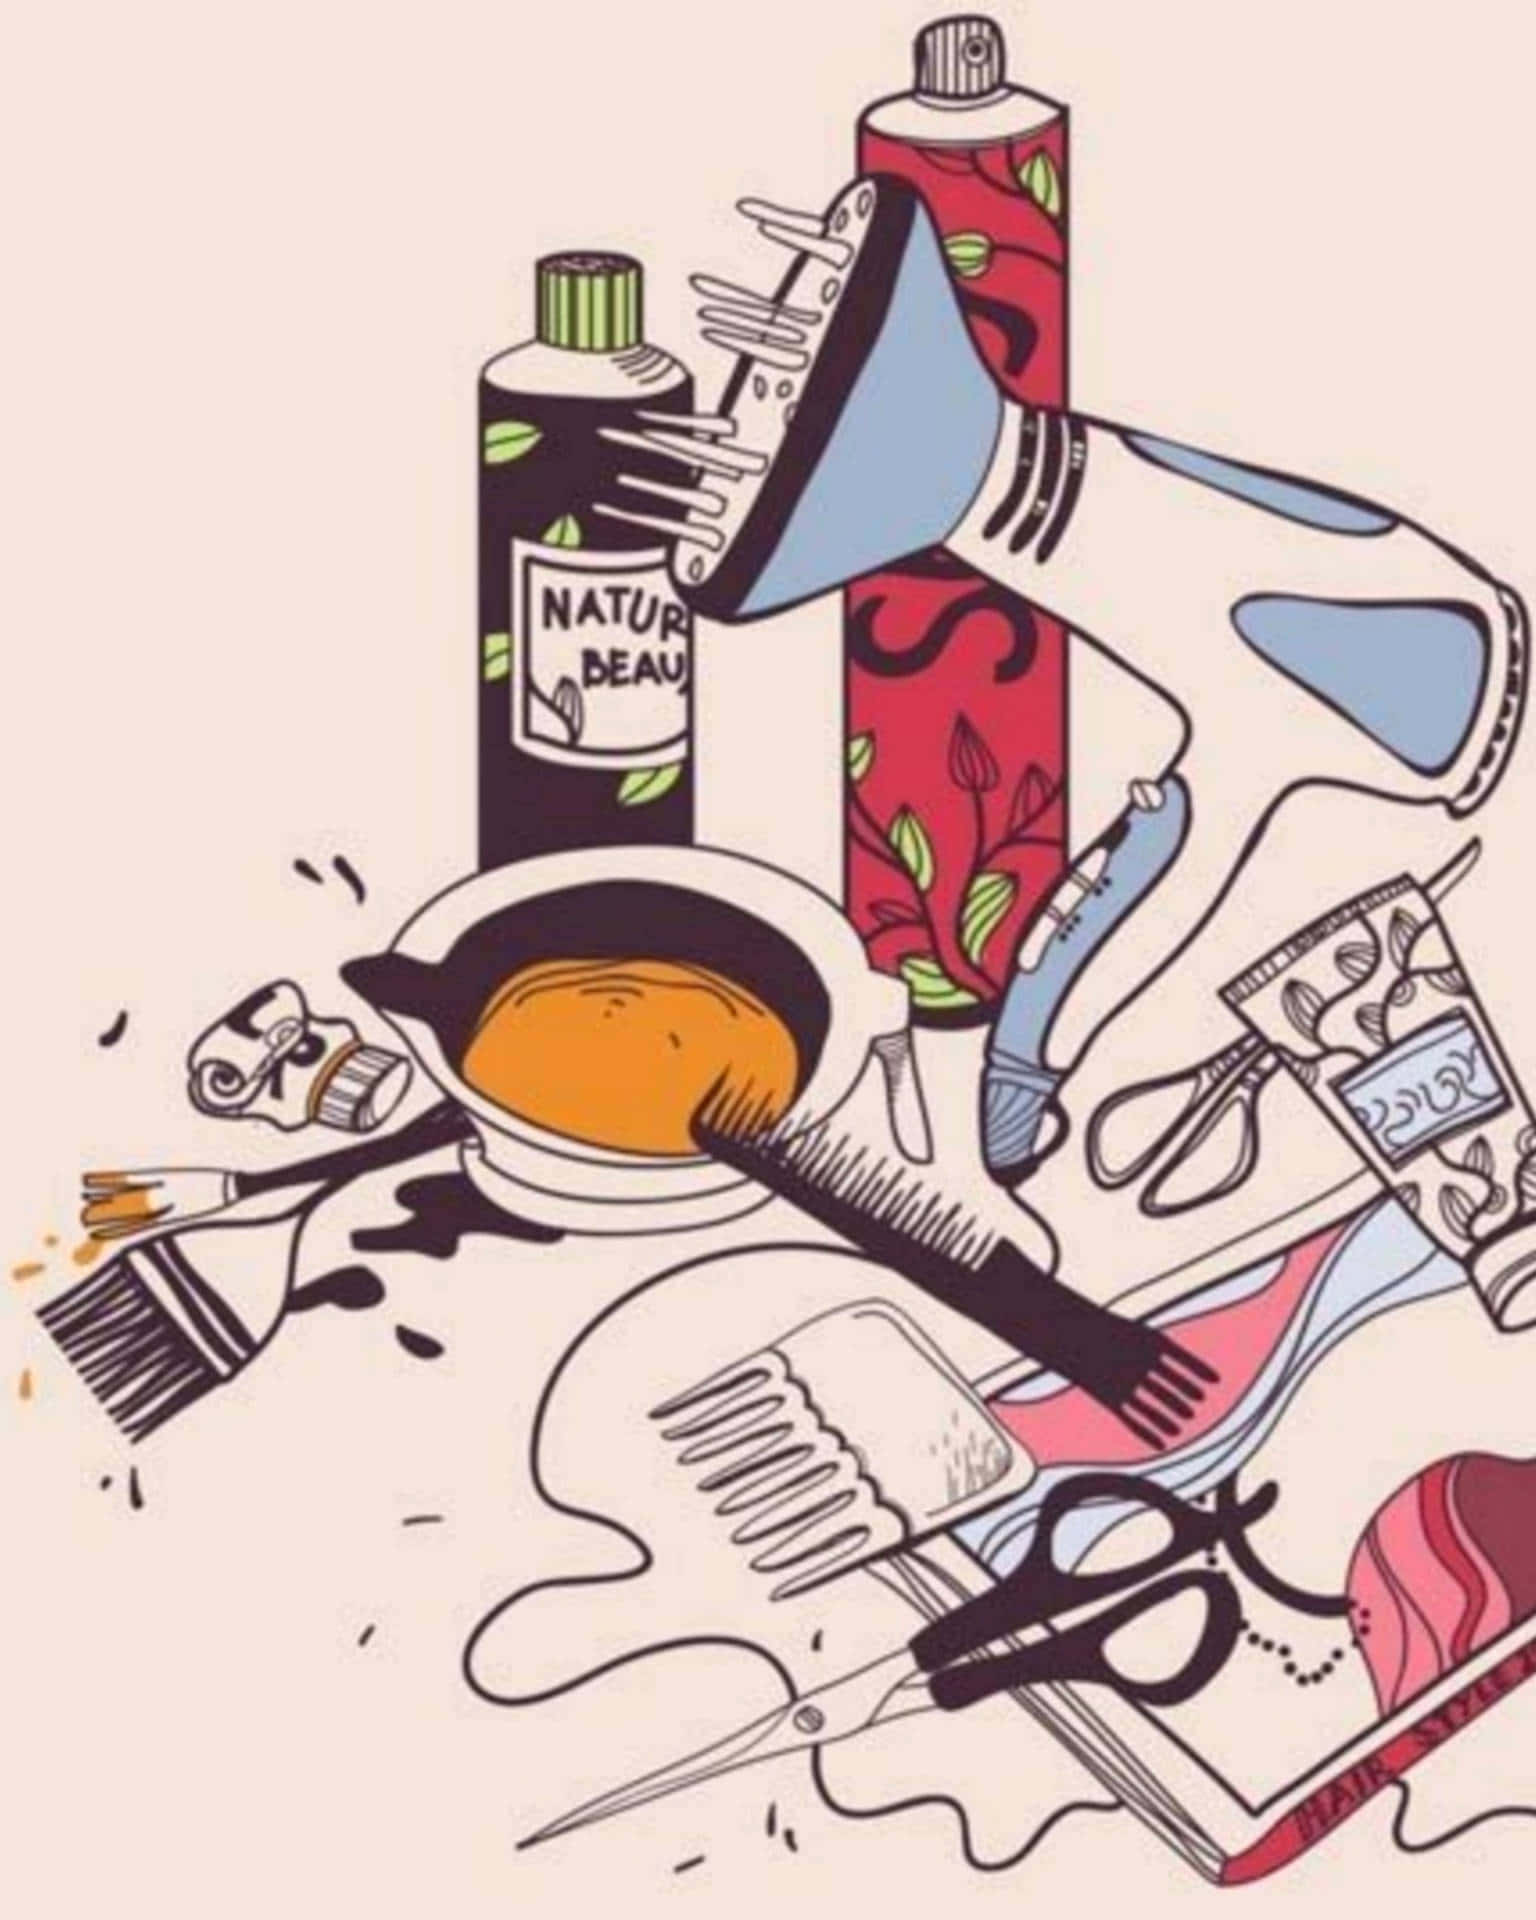 A Drawing Of A Hairdryer, Hairbrush, And Other Items